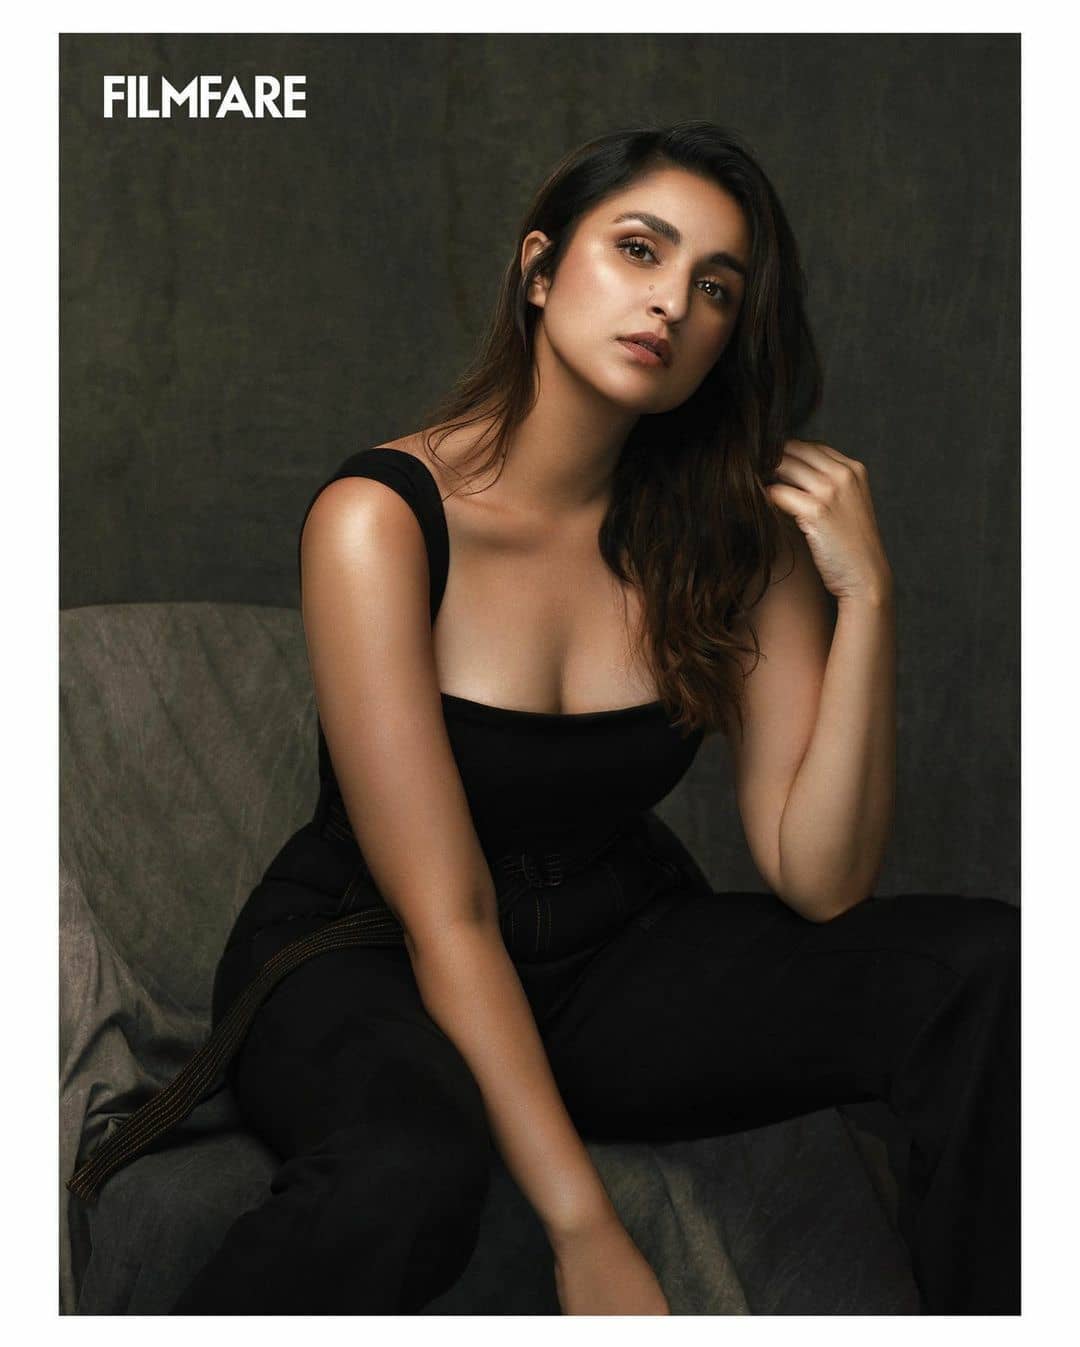 Parineeti Chopra shares her stunning picture in black outfit 9417